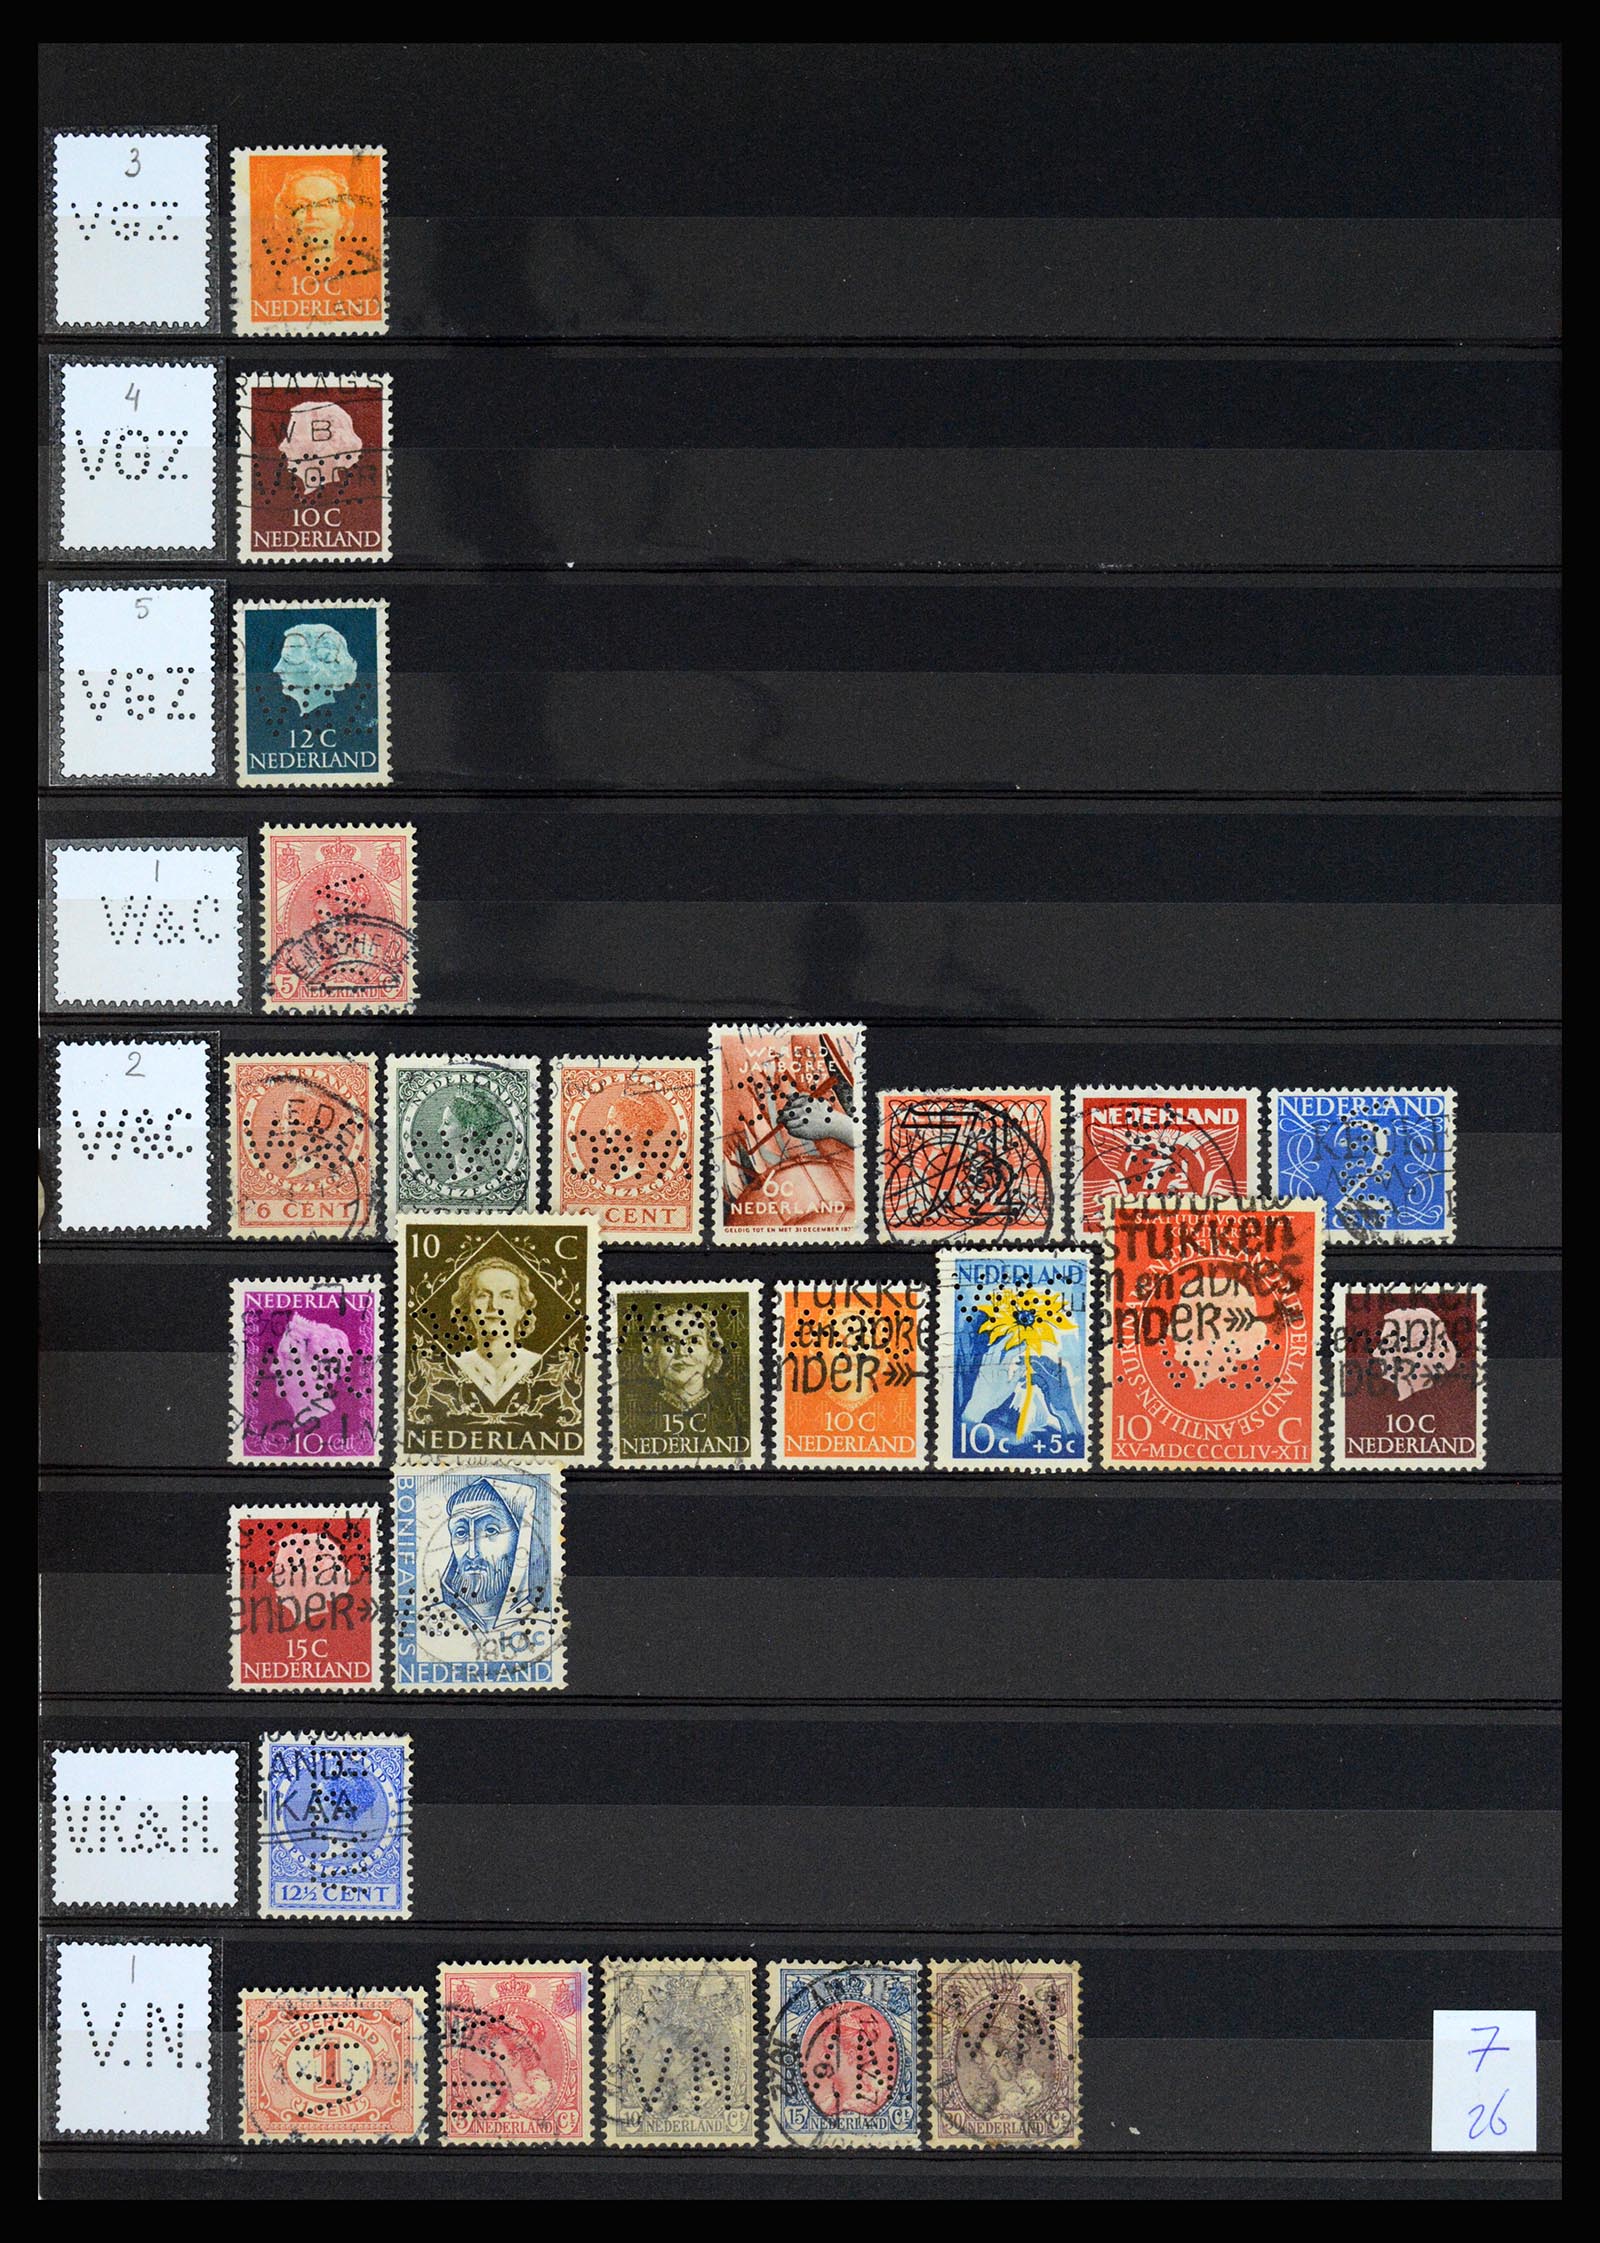 37183 053 - Stamp collection 37183 Netherlands perfins 1872-1960.